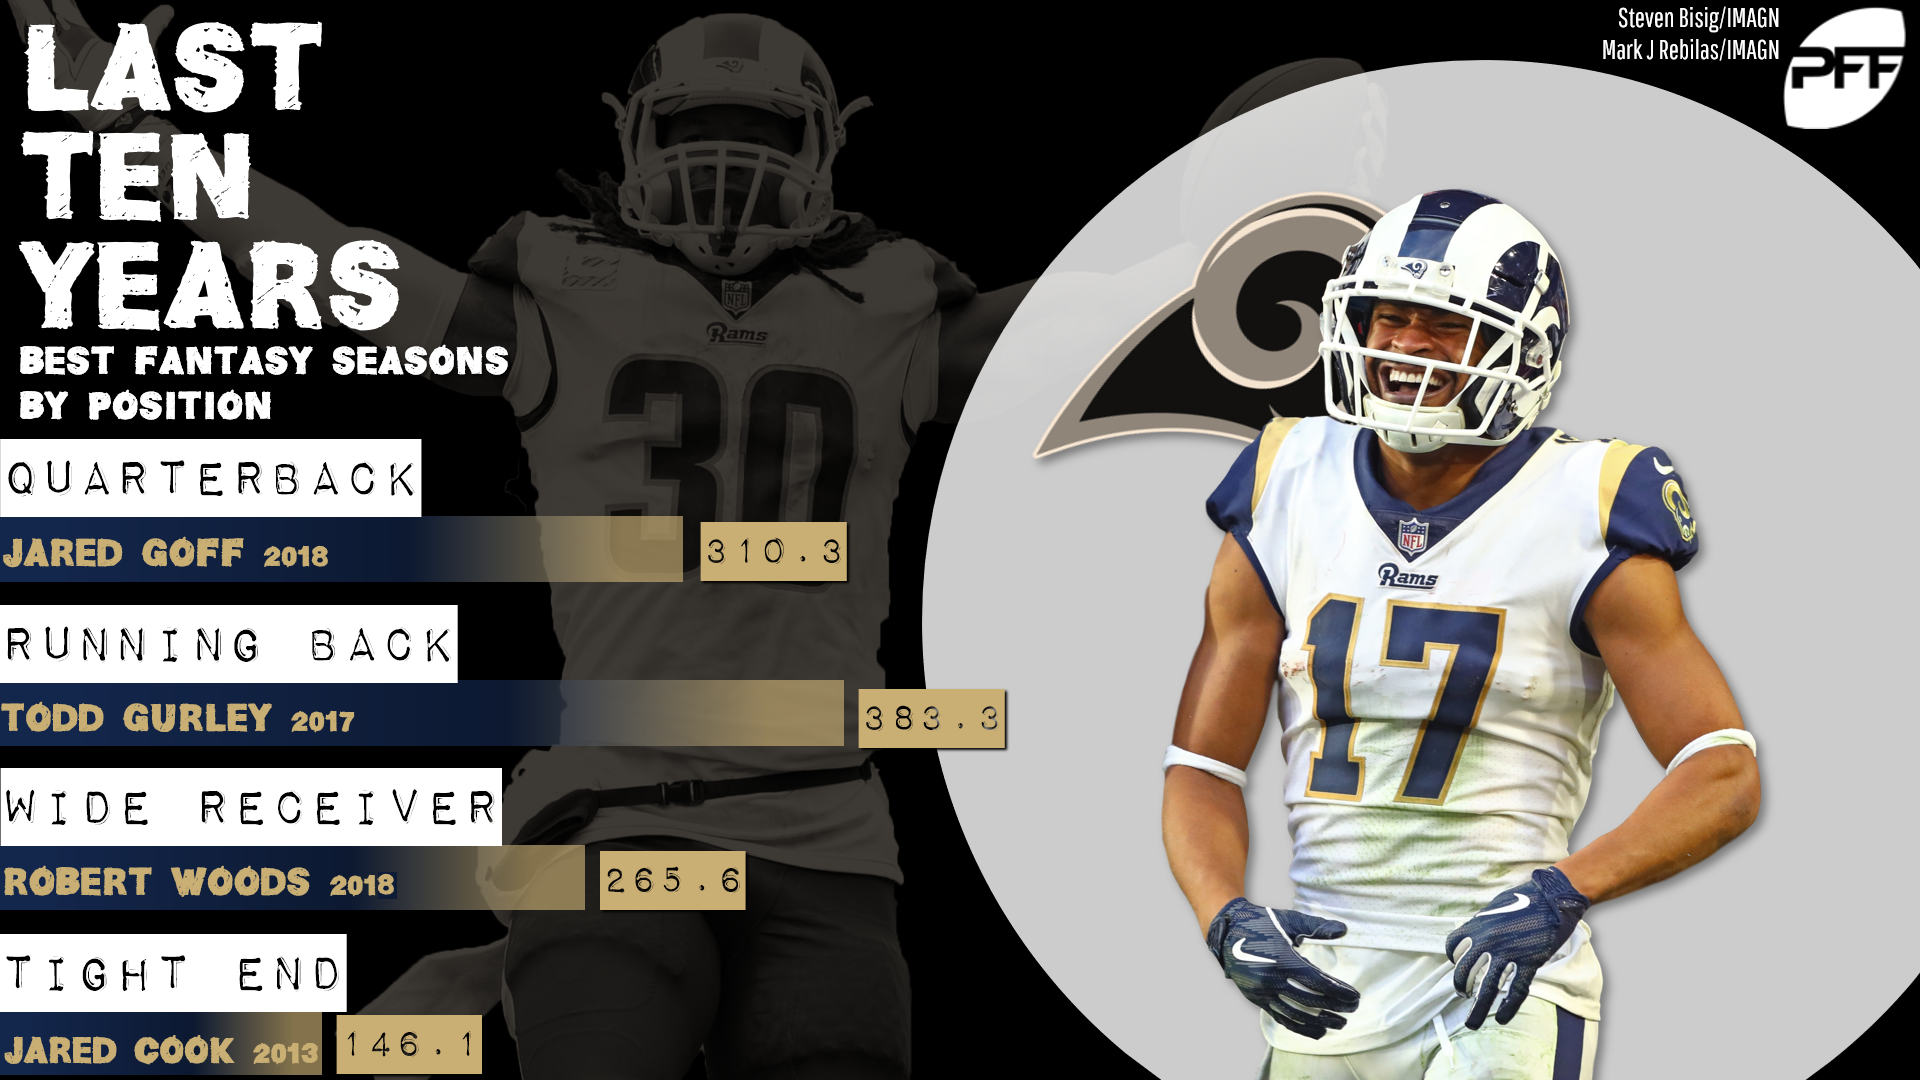 Fantasy football stats: Los Rams best of the last decade | Fantasy Football News, Rankings and Projections | PFF